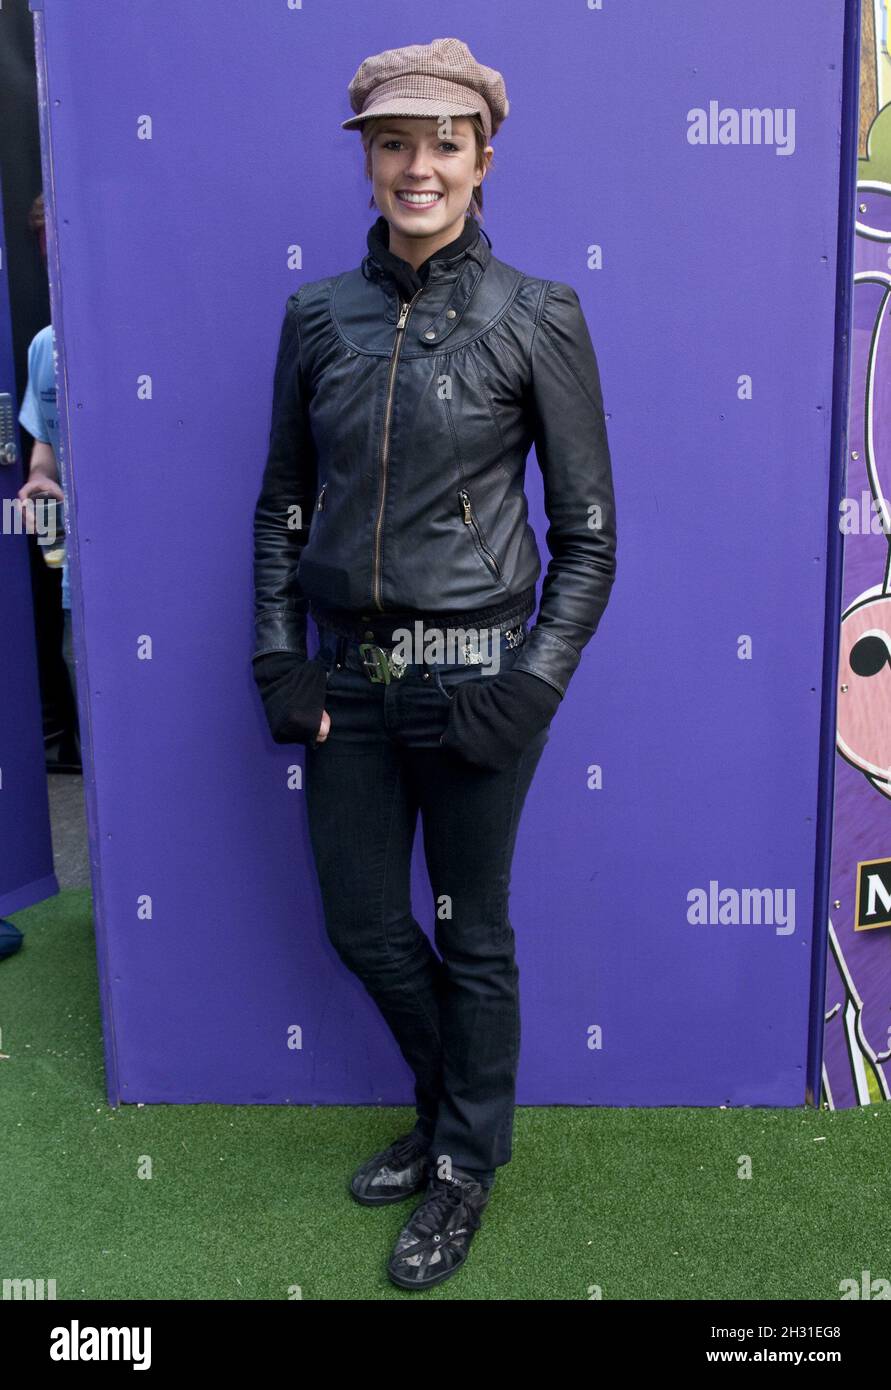 Isabella Calthorpe attends the E4 Udderbelly launch Party at Southbank Centre, London Stock Photo